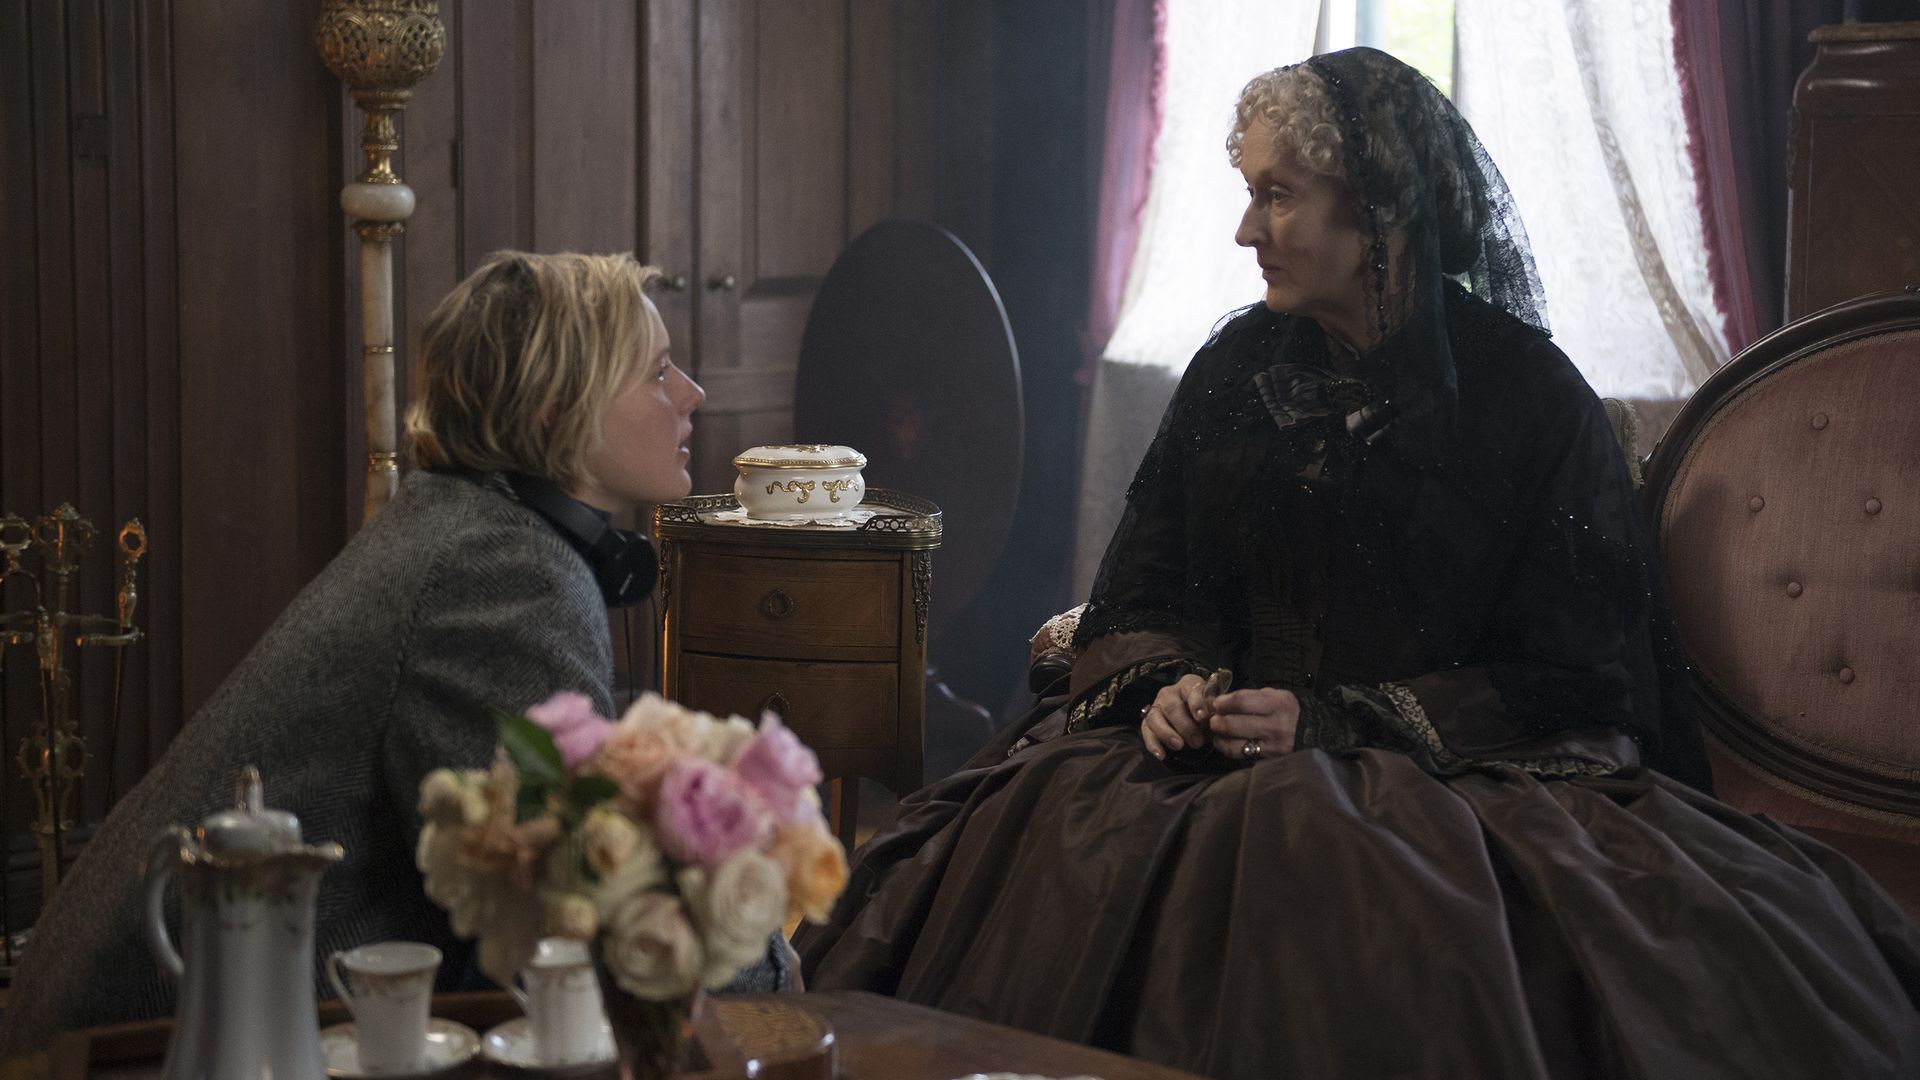 In this image, Meryl Streep sits in period Victorian dress while speaking with director Greta Gerwig.